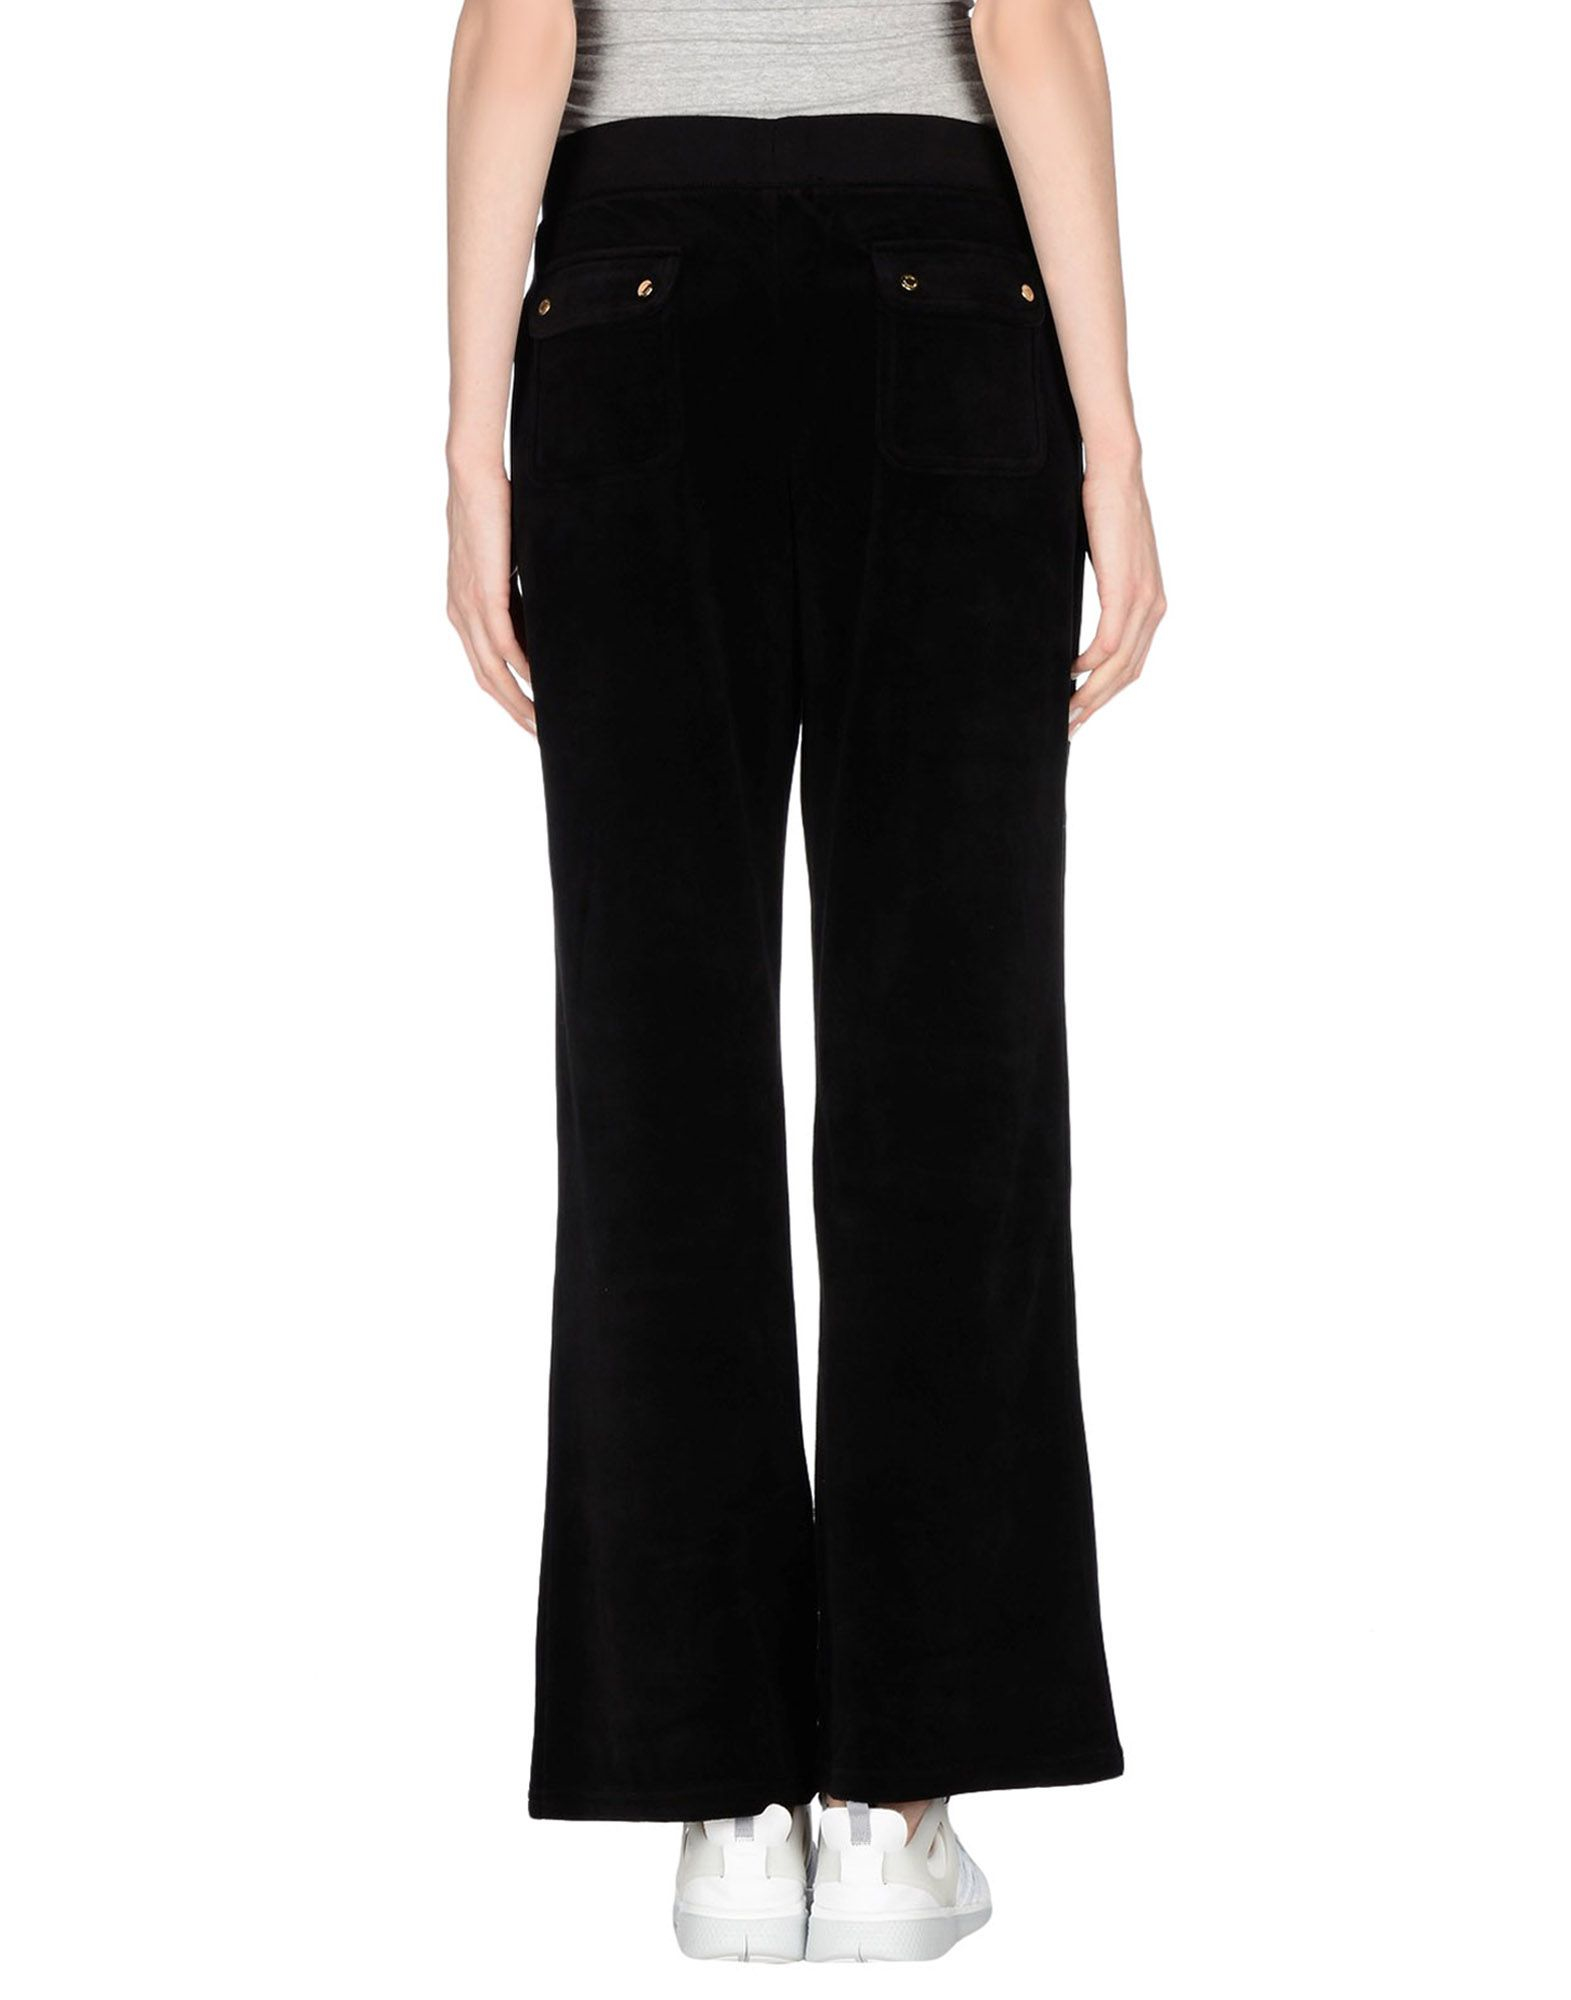 Lyst - Juicy Couture Casual Trouser in Black